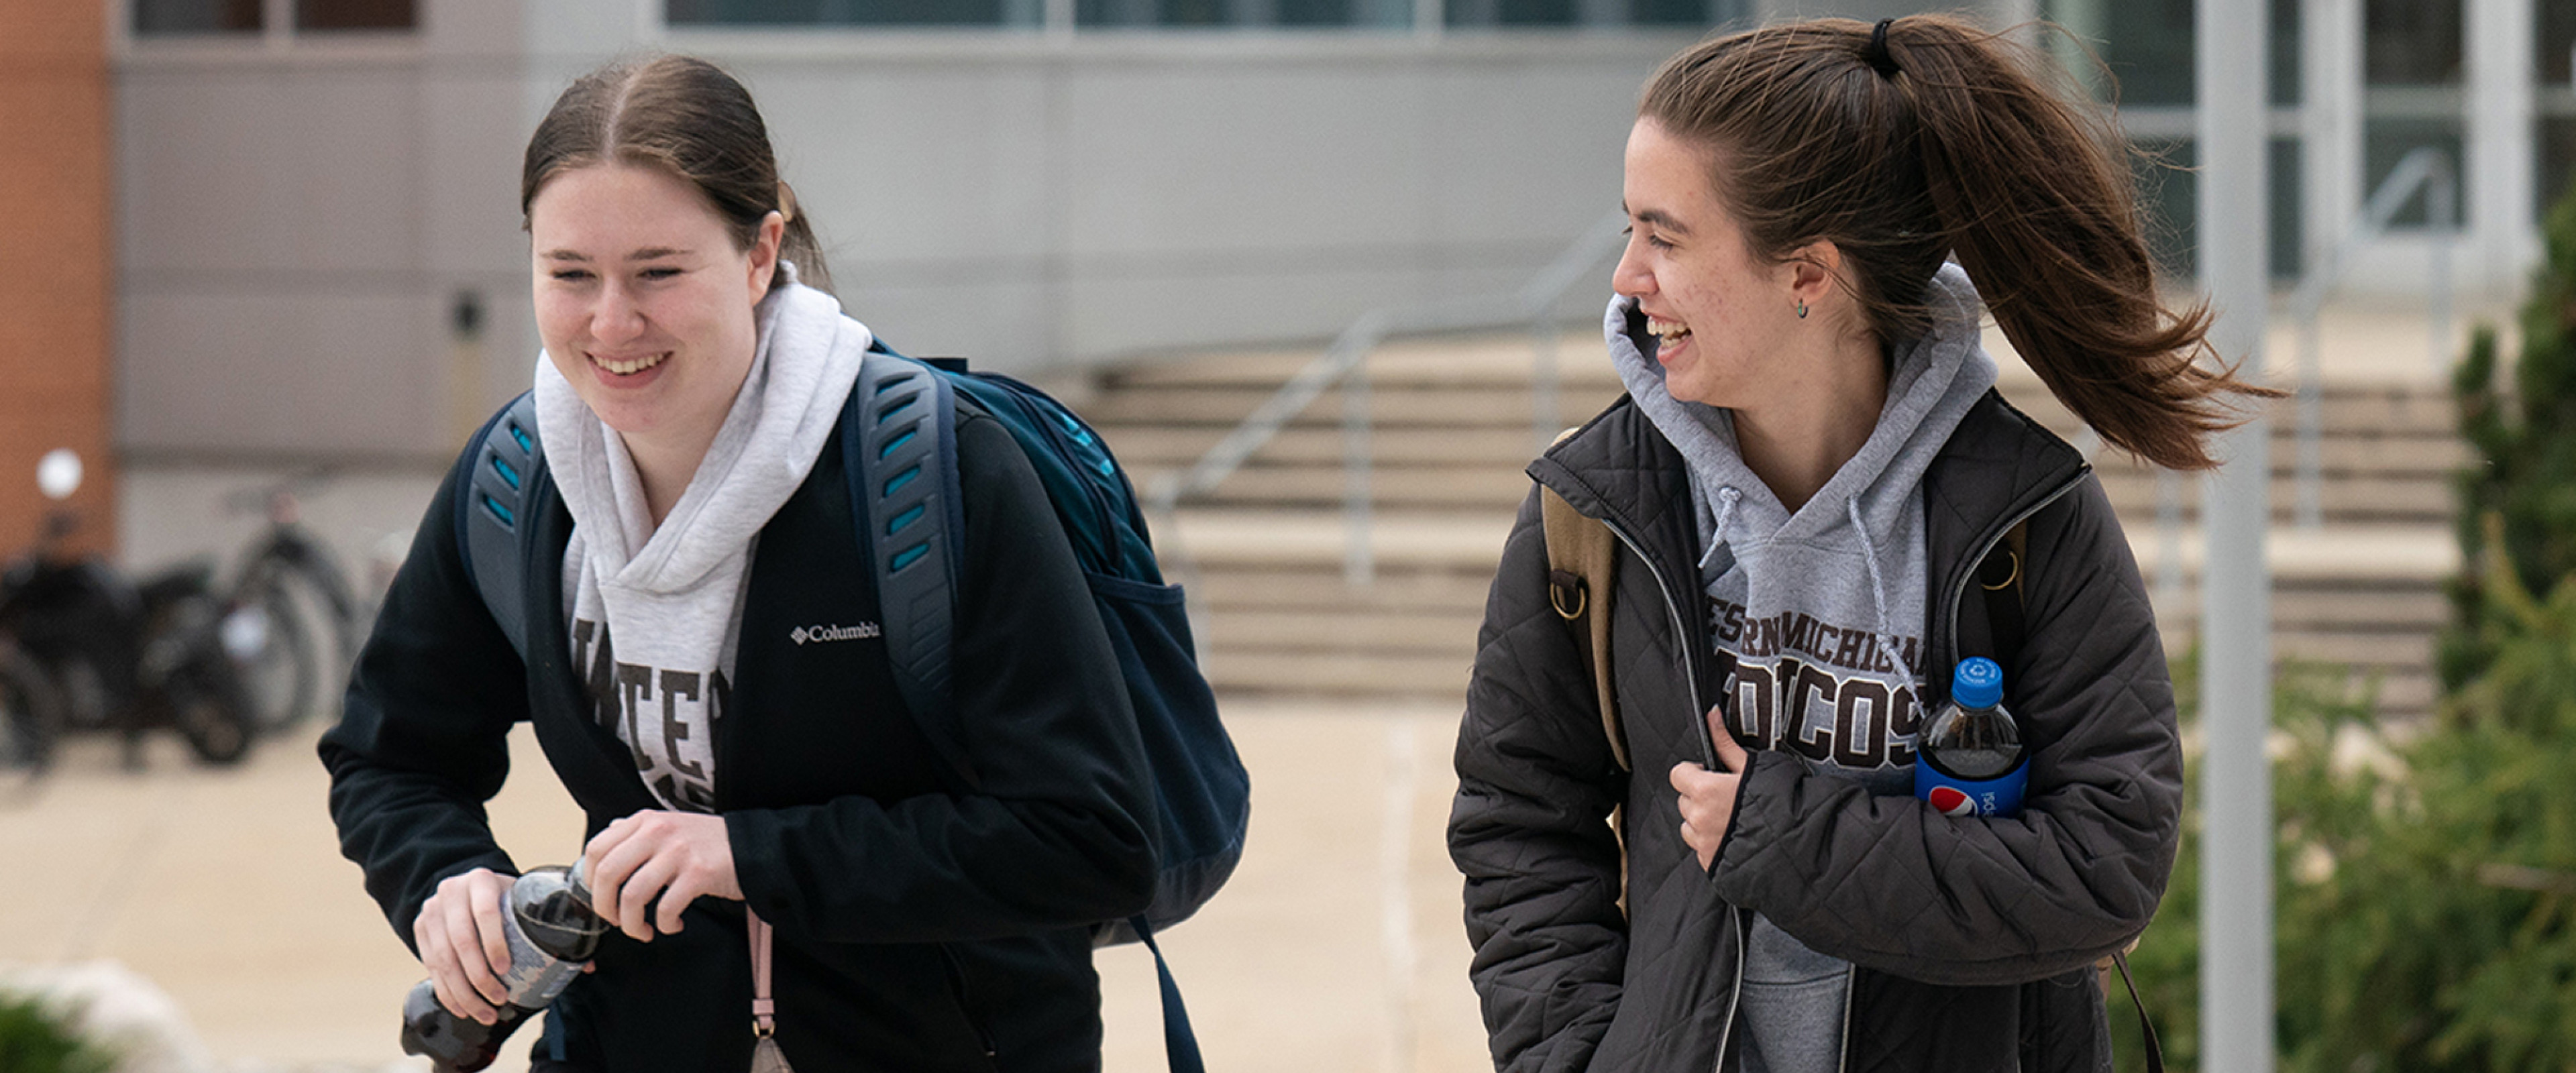 Two students wearing Western Michigan University sweatshirts laugh with one another while walking through an outdoor area of campus, near the University Computing Center and the Chemistry Building.